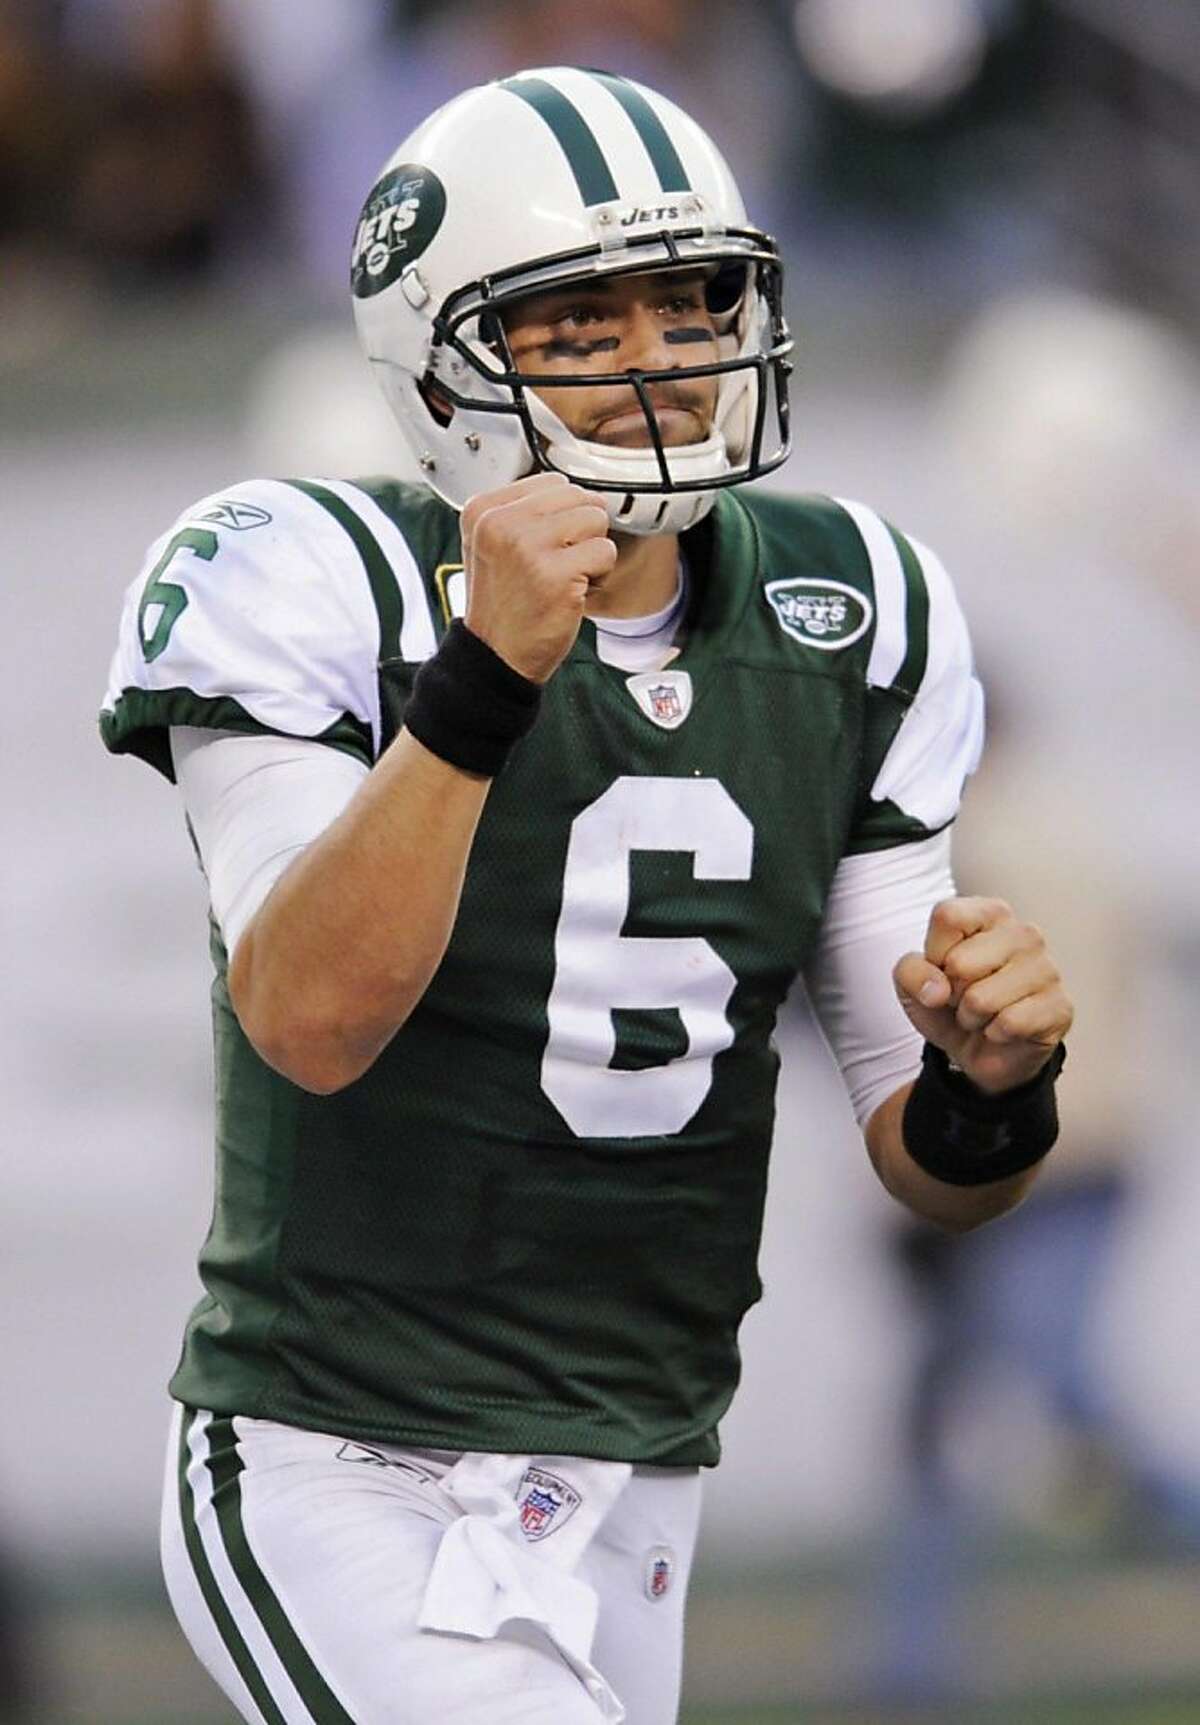 New York Jets quarterback Mark Sanchez reacts after throwing a touchdown pass to Santonio Holmes during the fourth quarter of an NFL football game Sunday, Nov. 27, 2011 in East Rutherford, N.J. The Jets defeated the Buffalo Bills 28-24. (AP Photo/Bill Kostroun) Ran on: 11-28-2011 Mark Sanchez celebrates his touchdown pass to Santonio Holmes with 1:01 left, which put the Jets ahead for good.